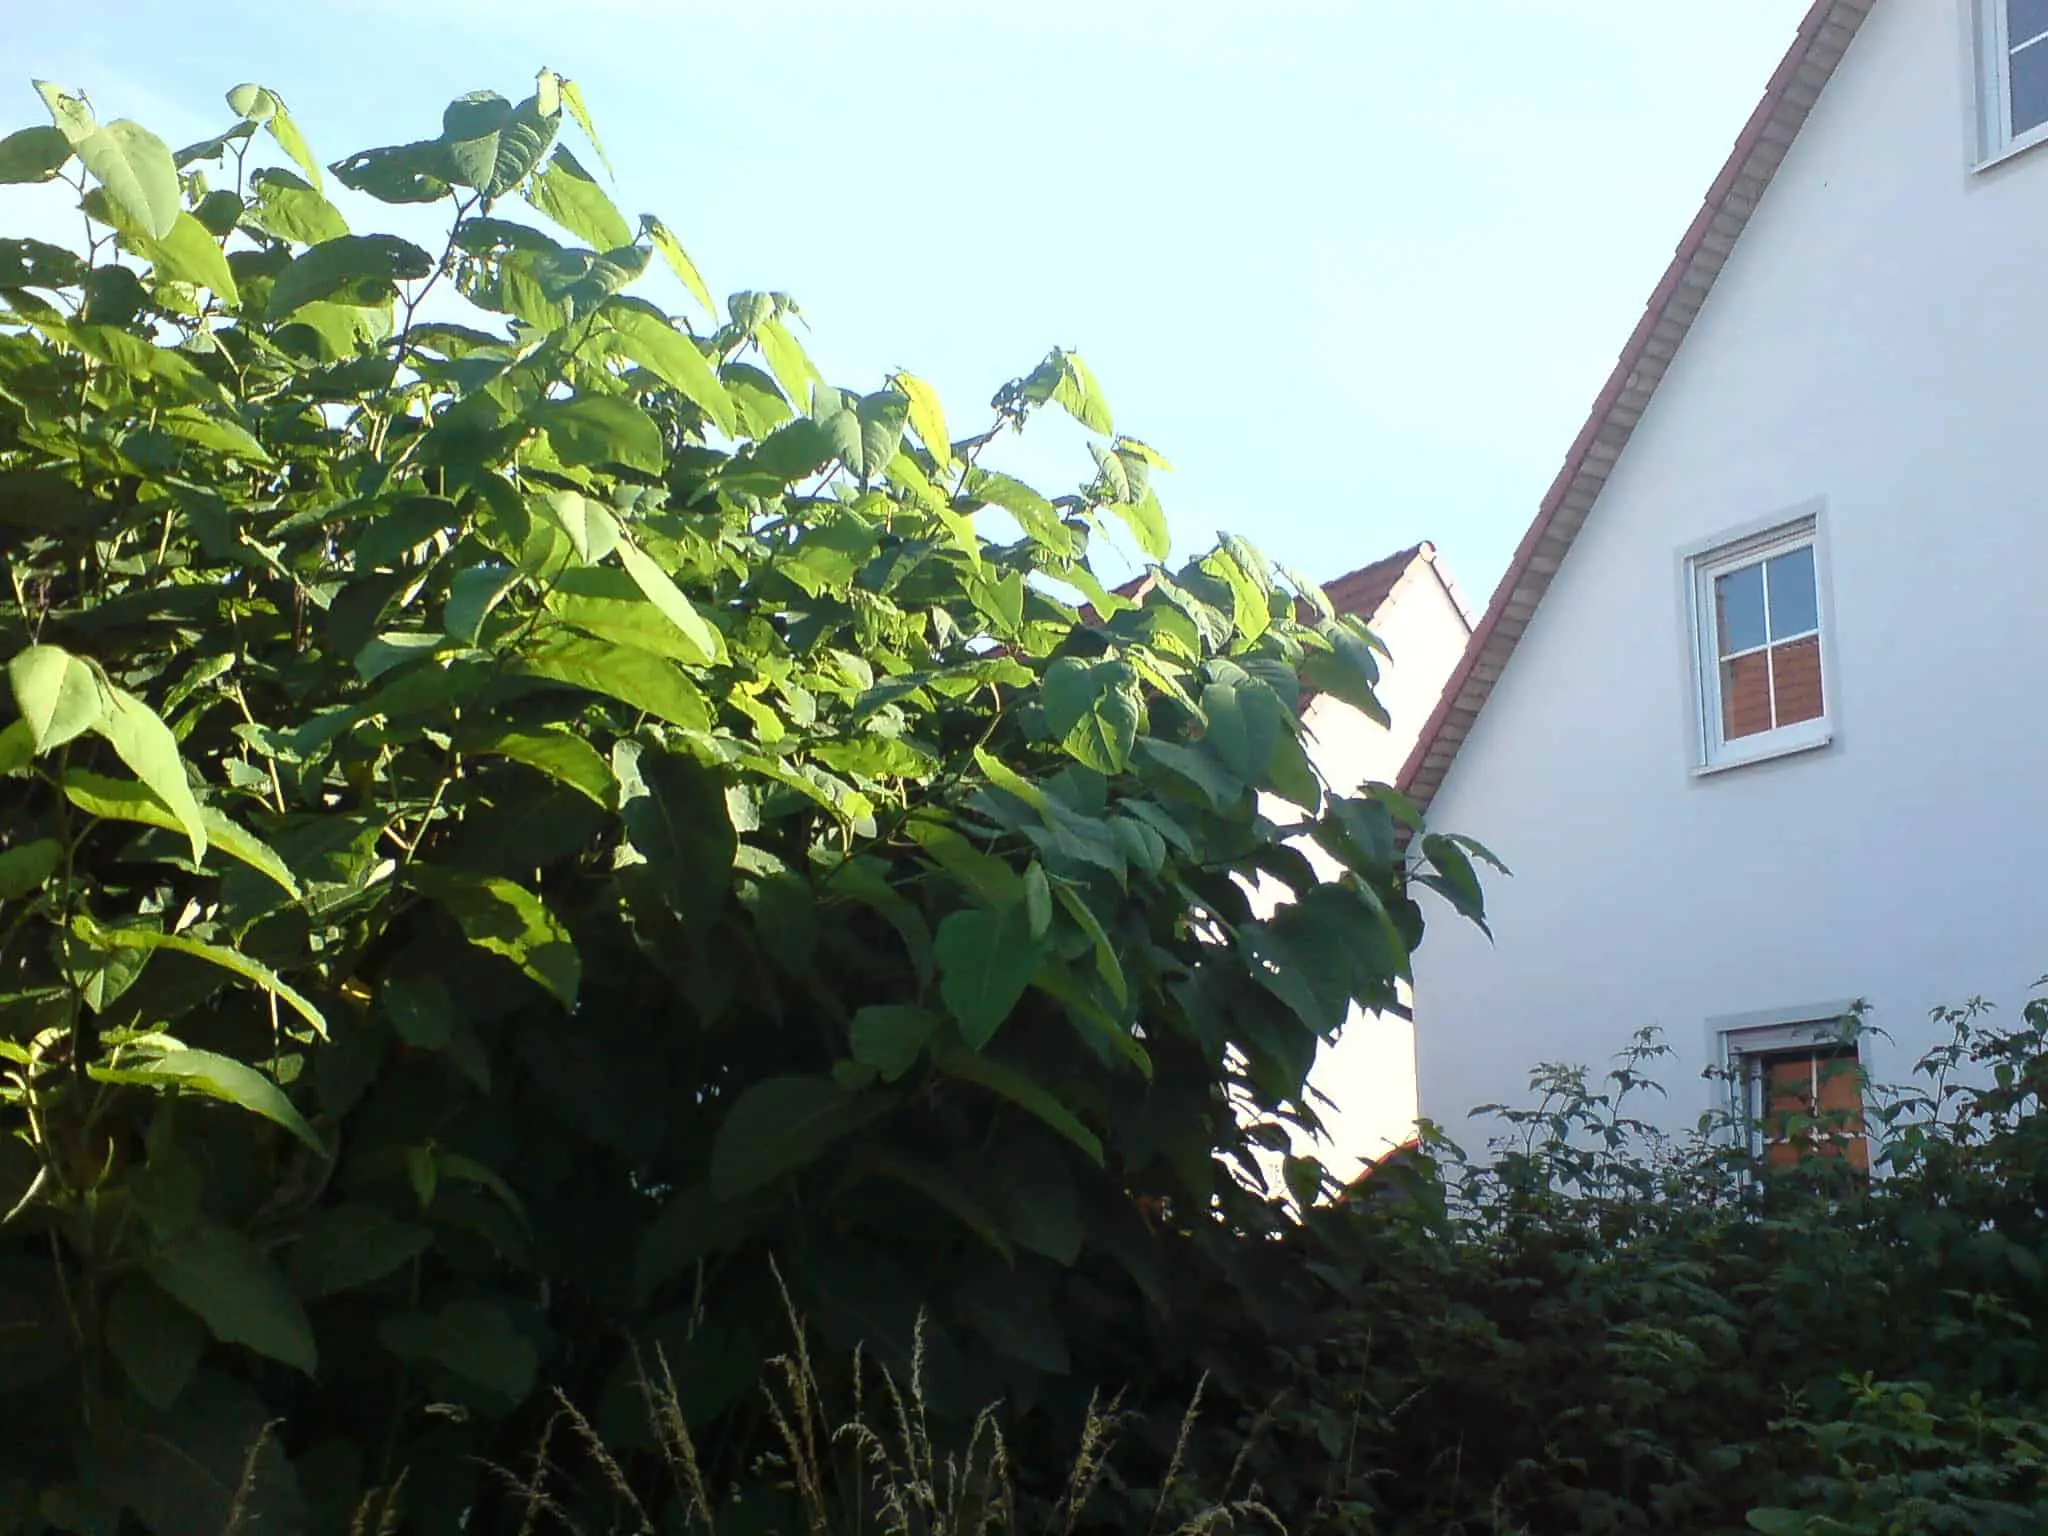 Buying a house with Japanese knotweed encroaching it can lead to huge problems if not dealt with sooner rather than later